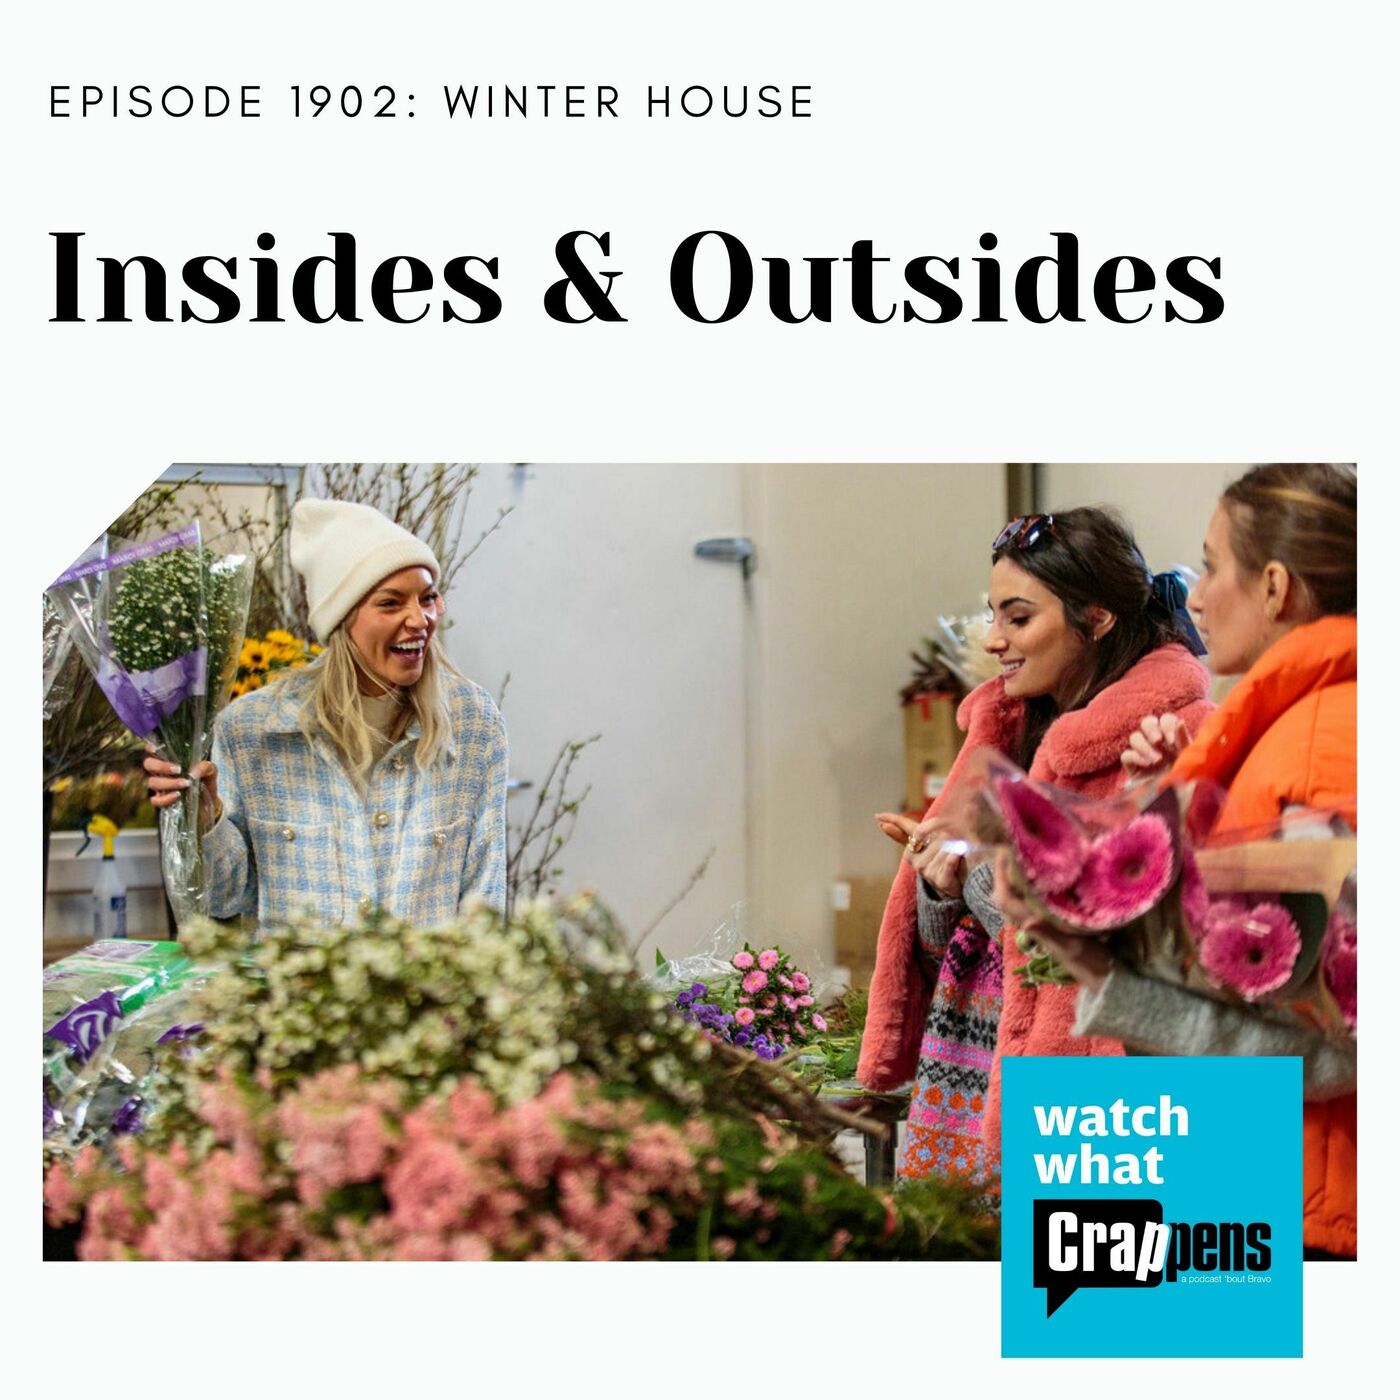 Winter House: Insides & Outsides